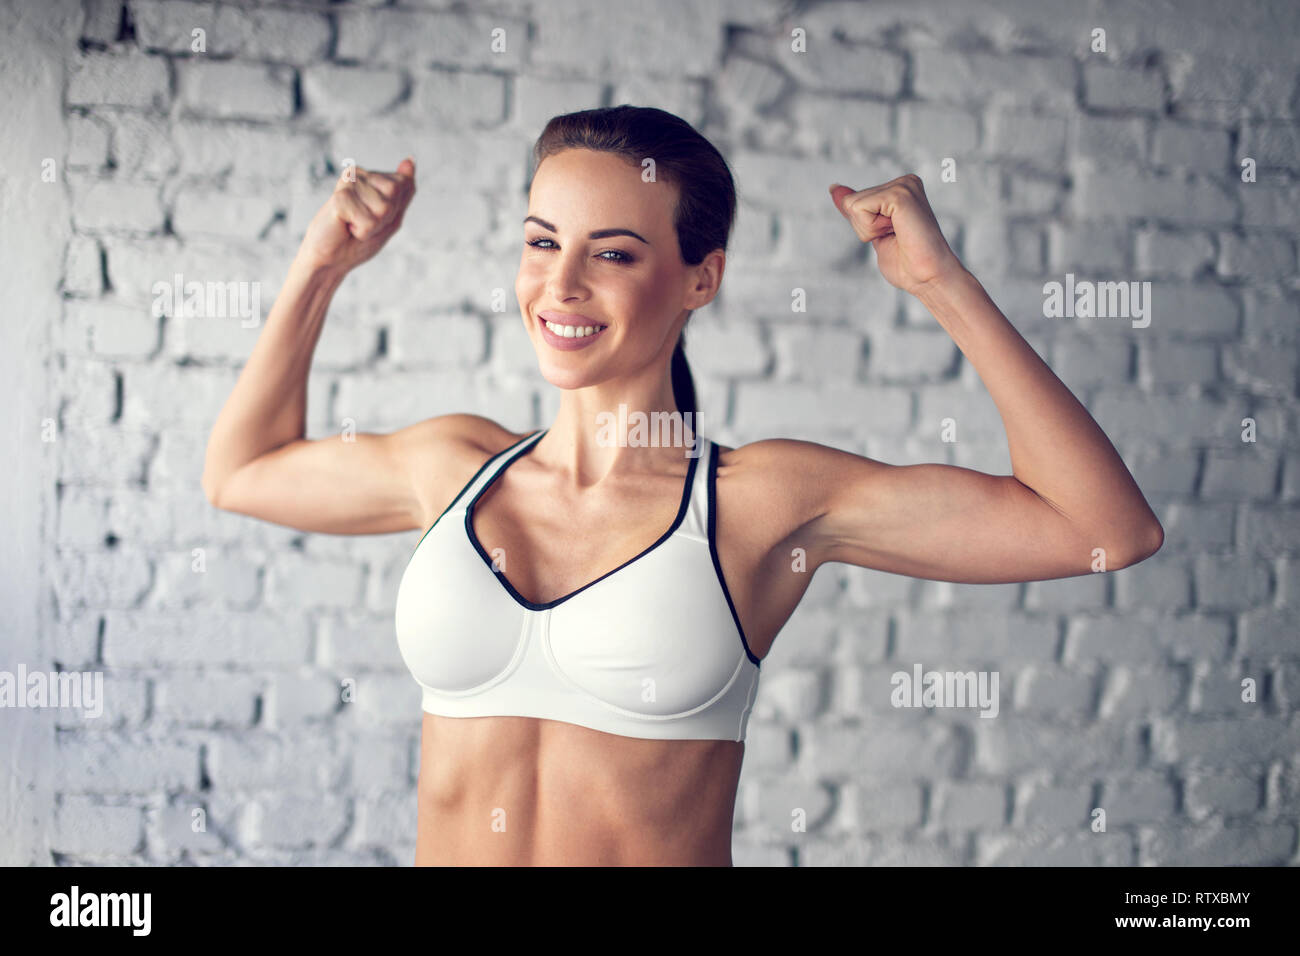 Fit young woman showing bicepses portrait Stock Photo